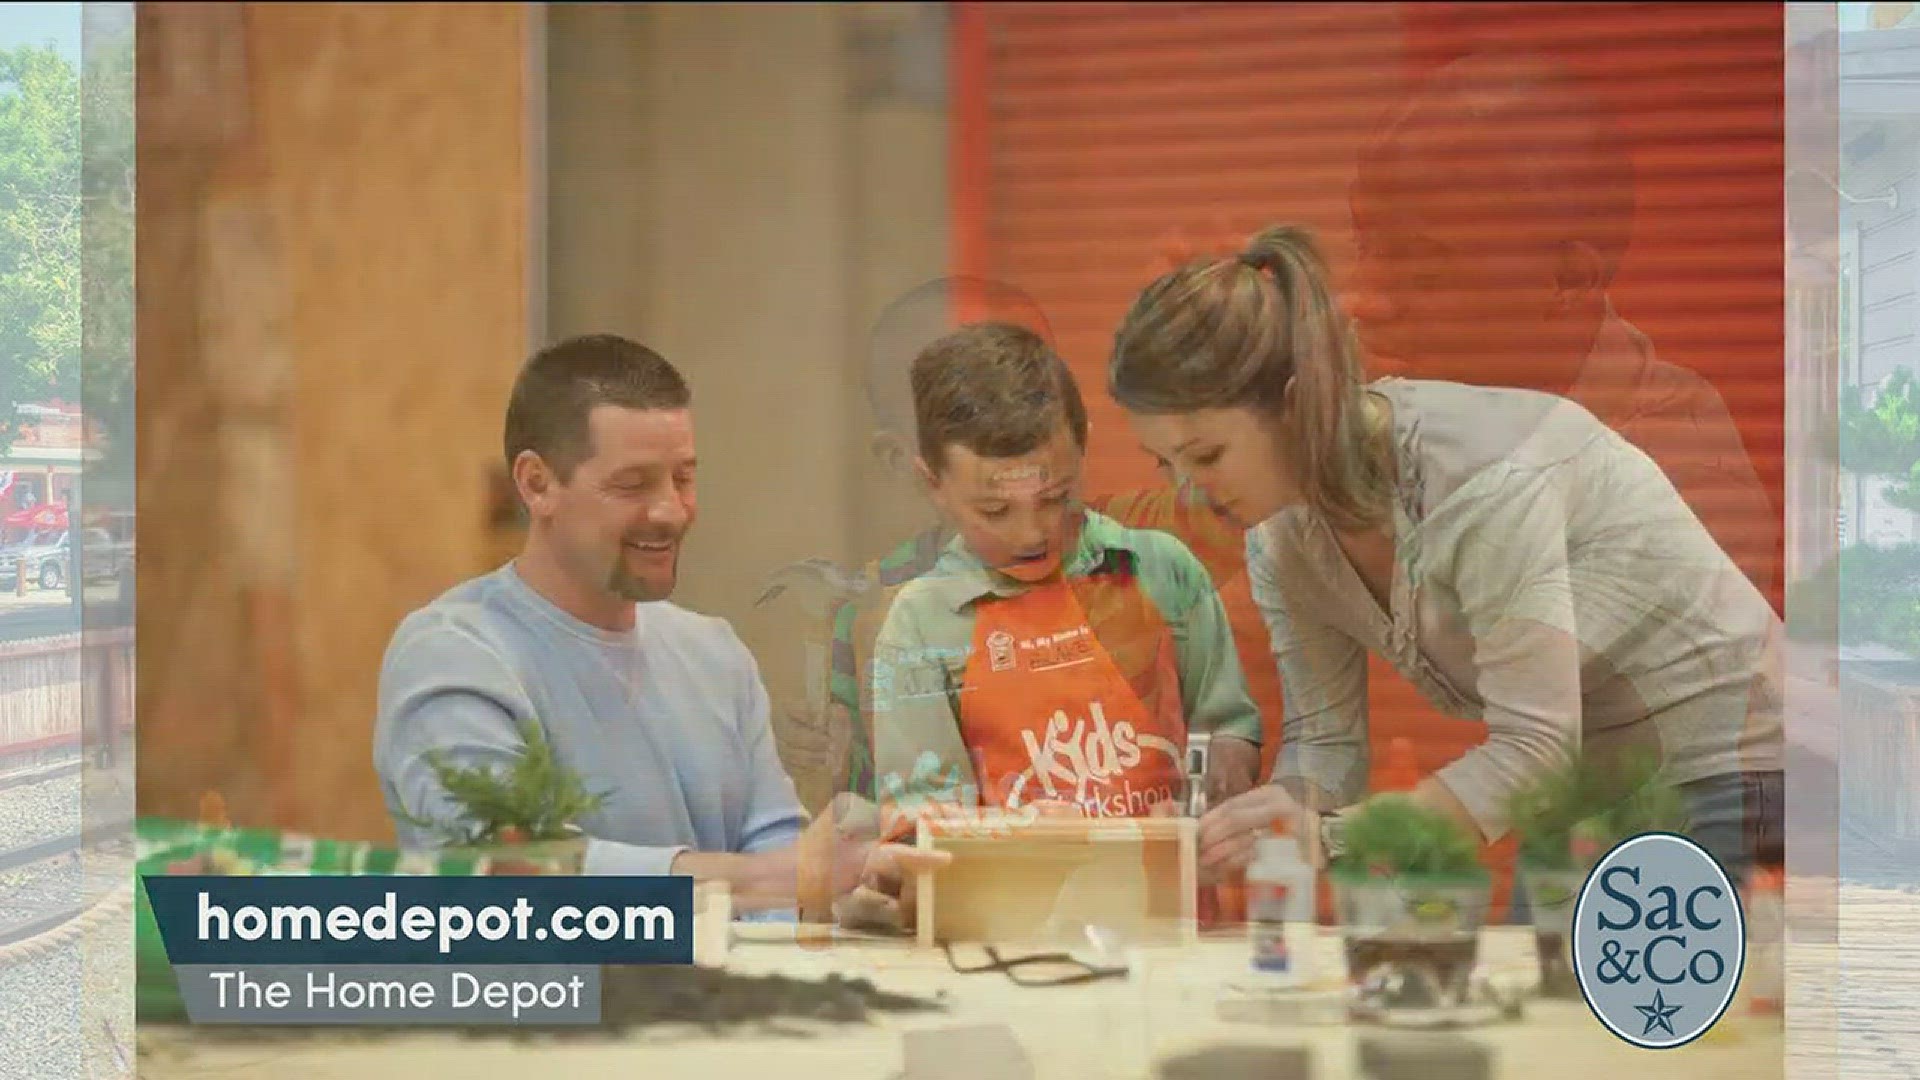 The Home Depot is the perfect place to bring the little ones for a few fun crafting projects!